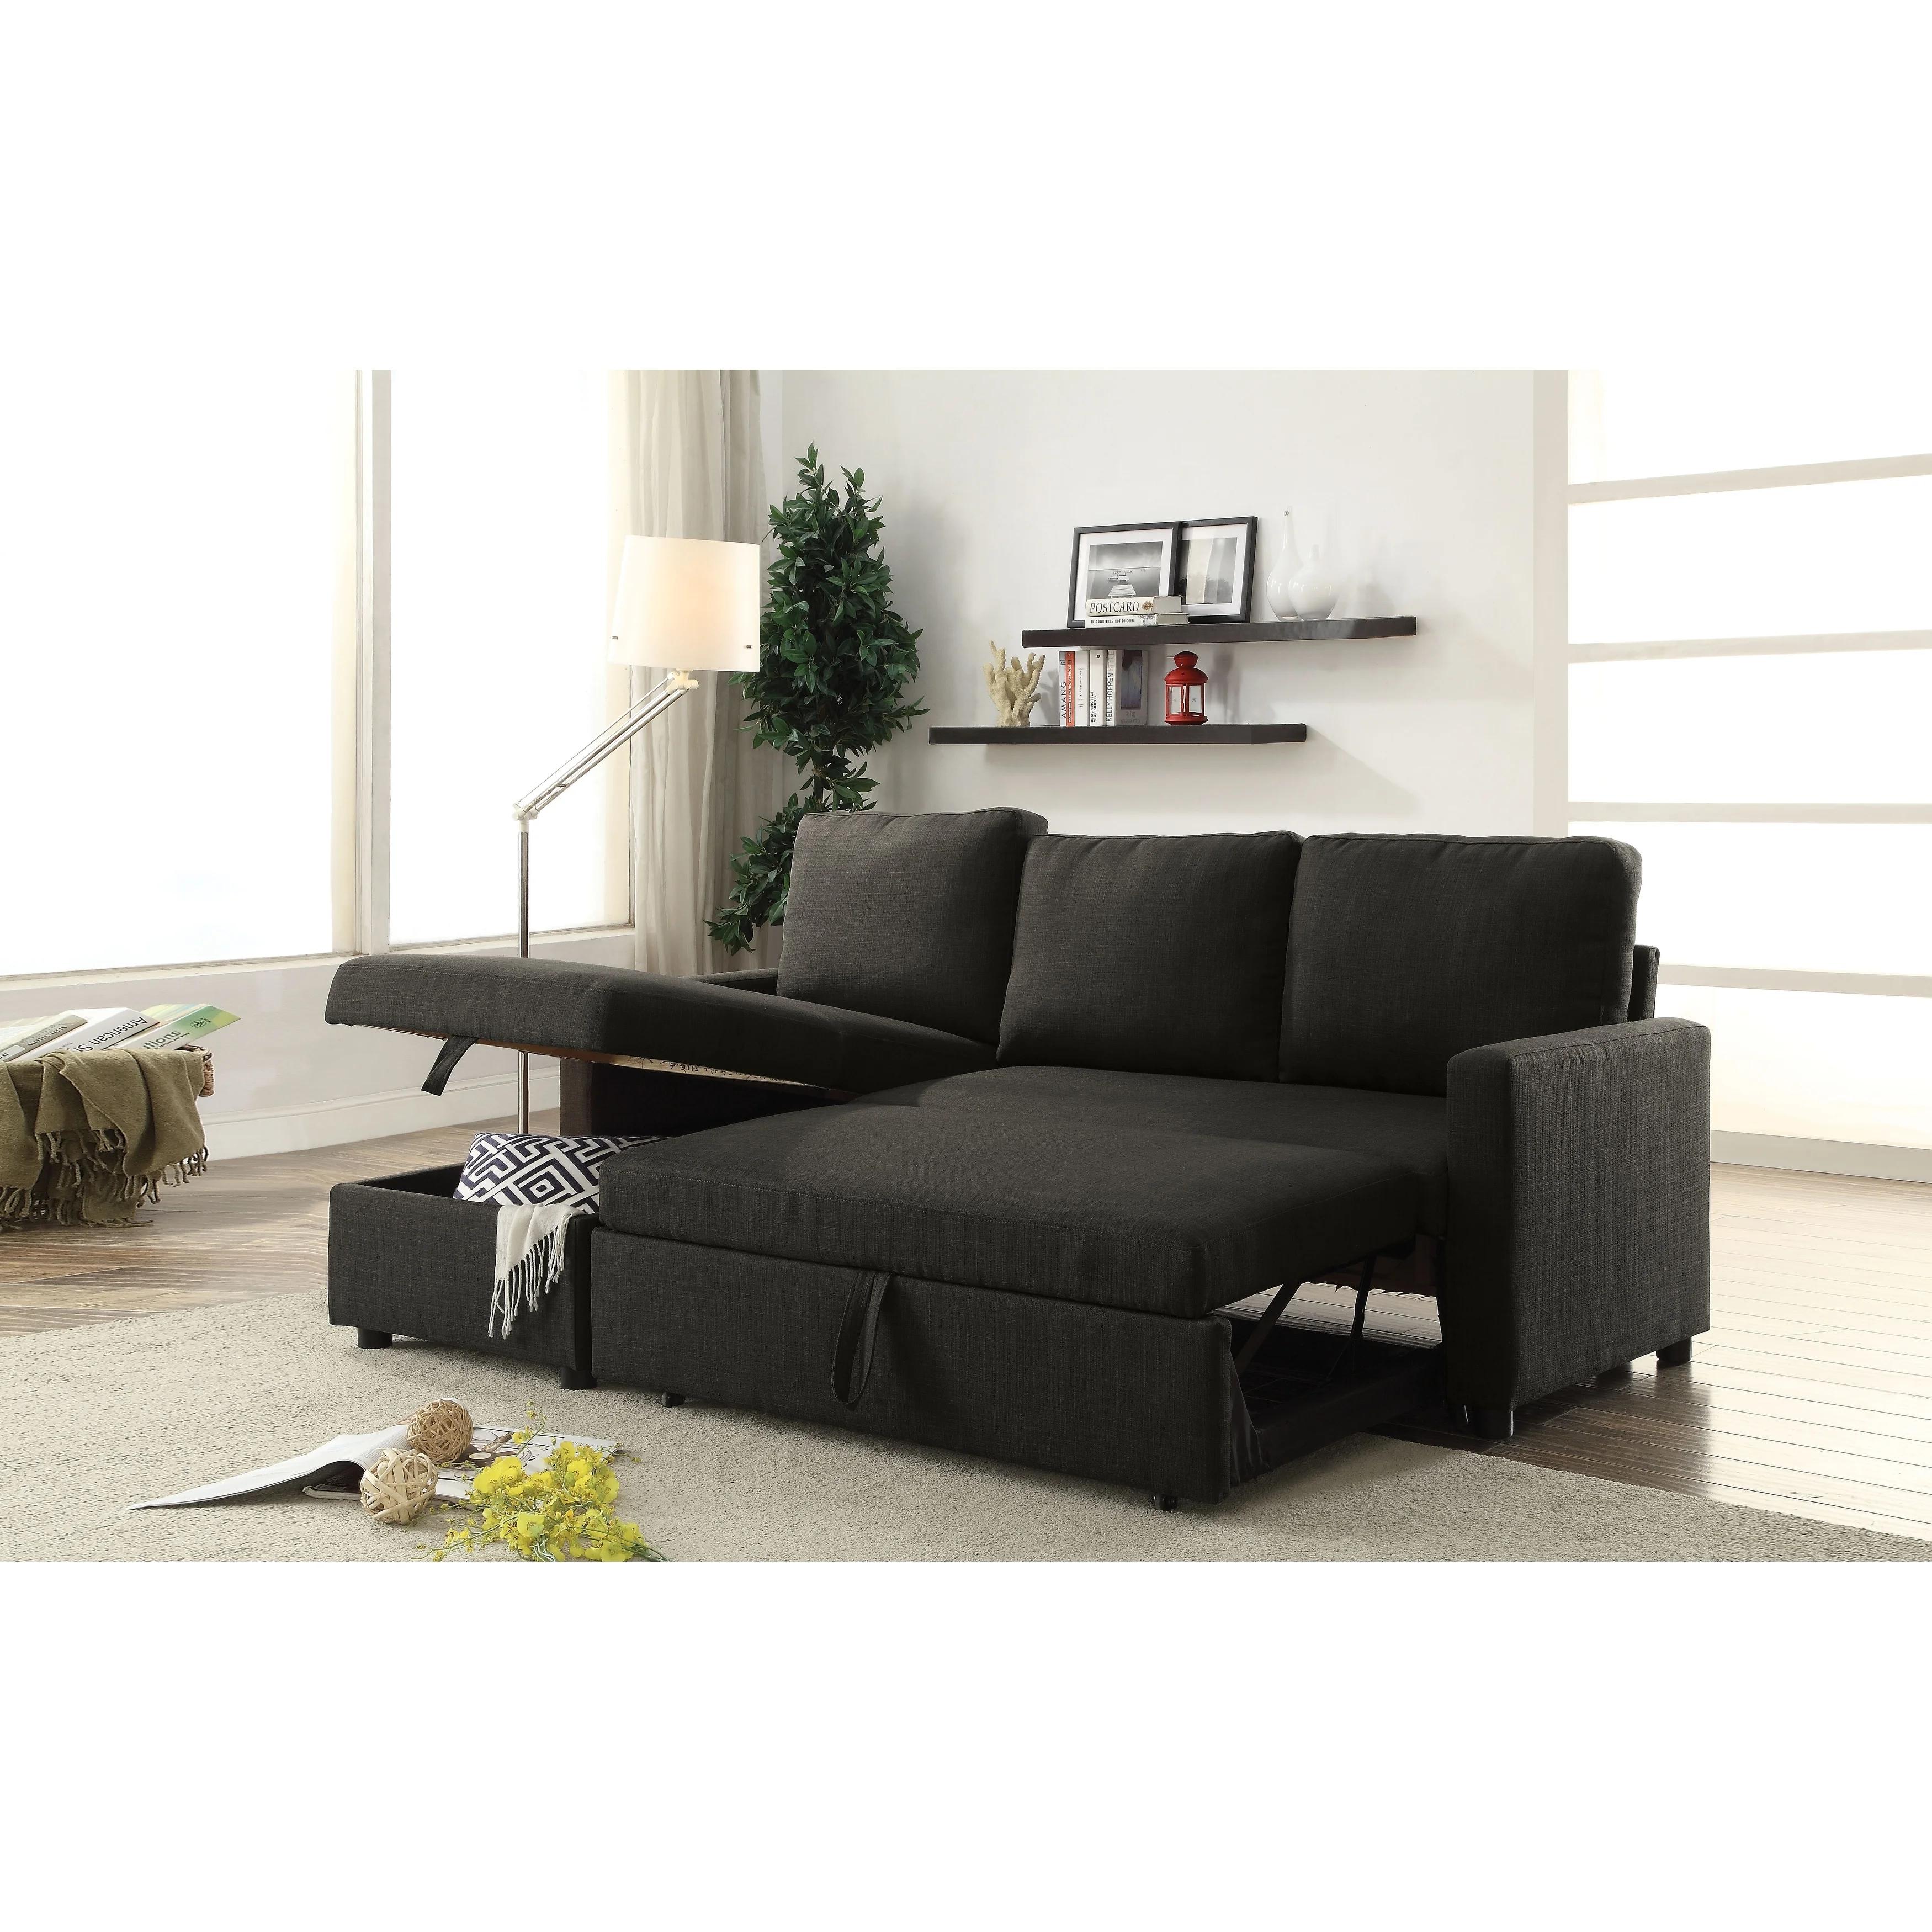 Transitional, Simple Sectional Sofa Vassenia 52300 in Charcoal Linen